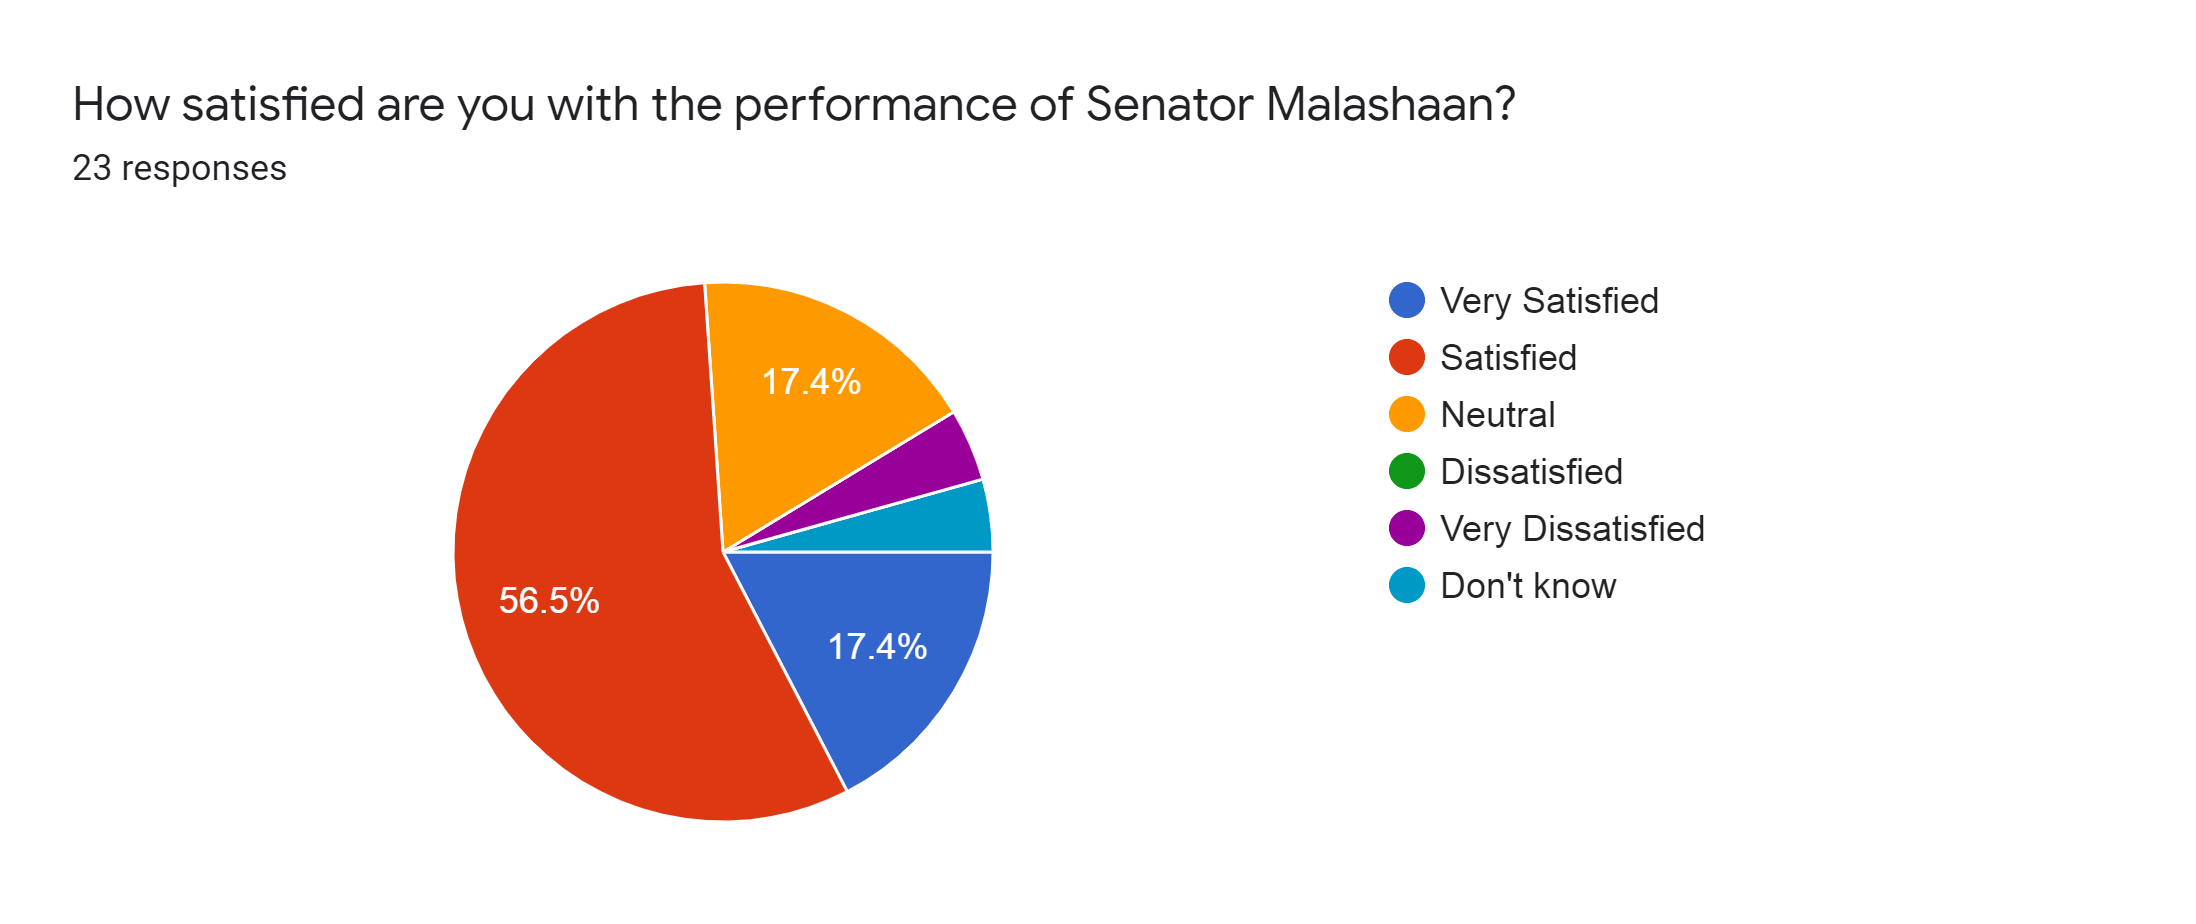 Forms response chart. Question title: How satisfied are you with the performance of Senator Malashaan?. Number of responses: 23 responses.